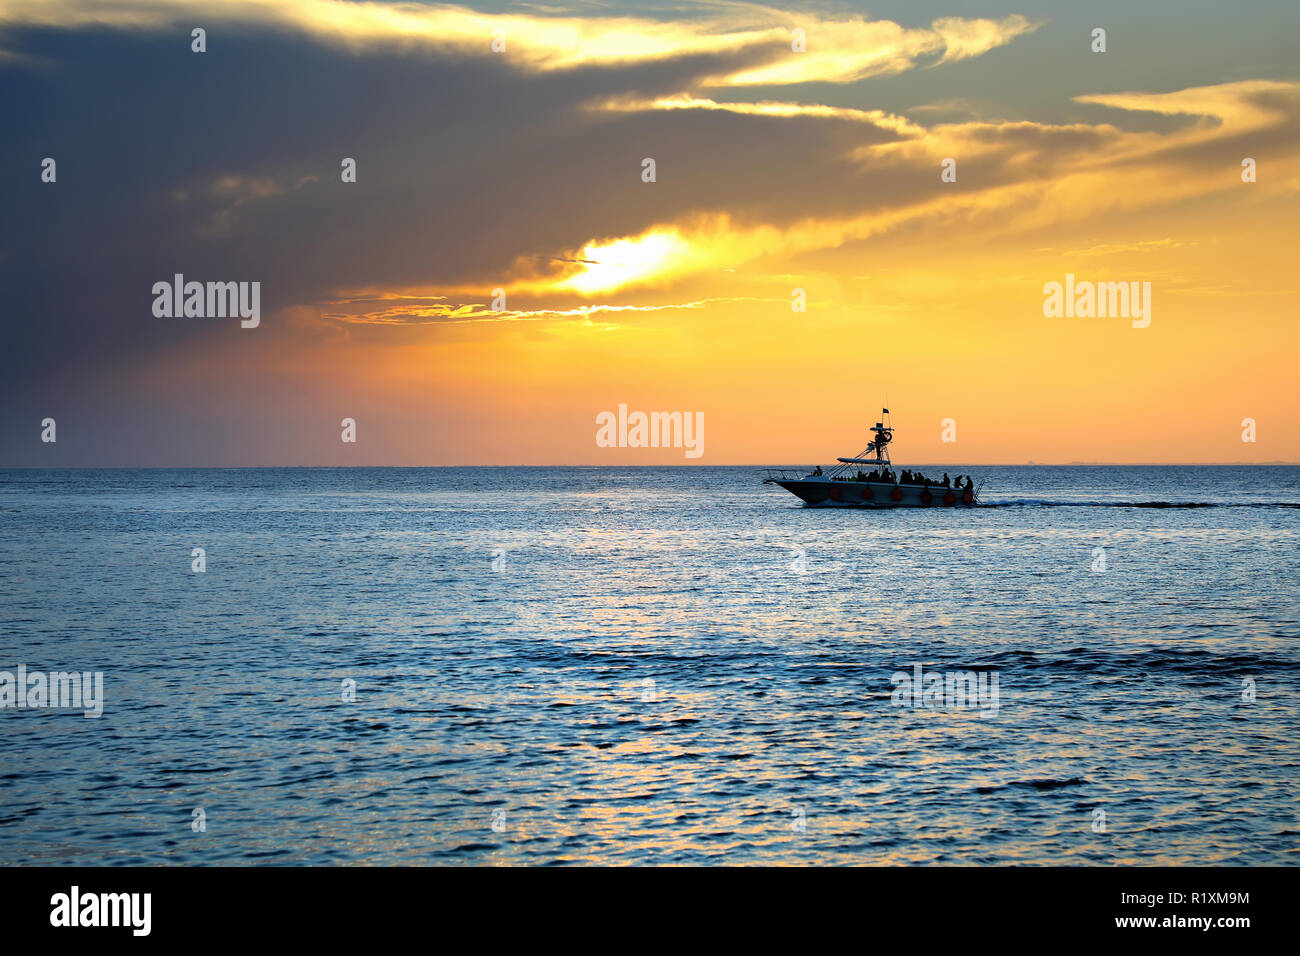 Colorful seascape image with shiny sea and speedboat over cloudy sky and sun during sunset in Cozumel, Mexico Stock Photo